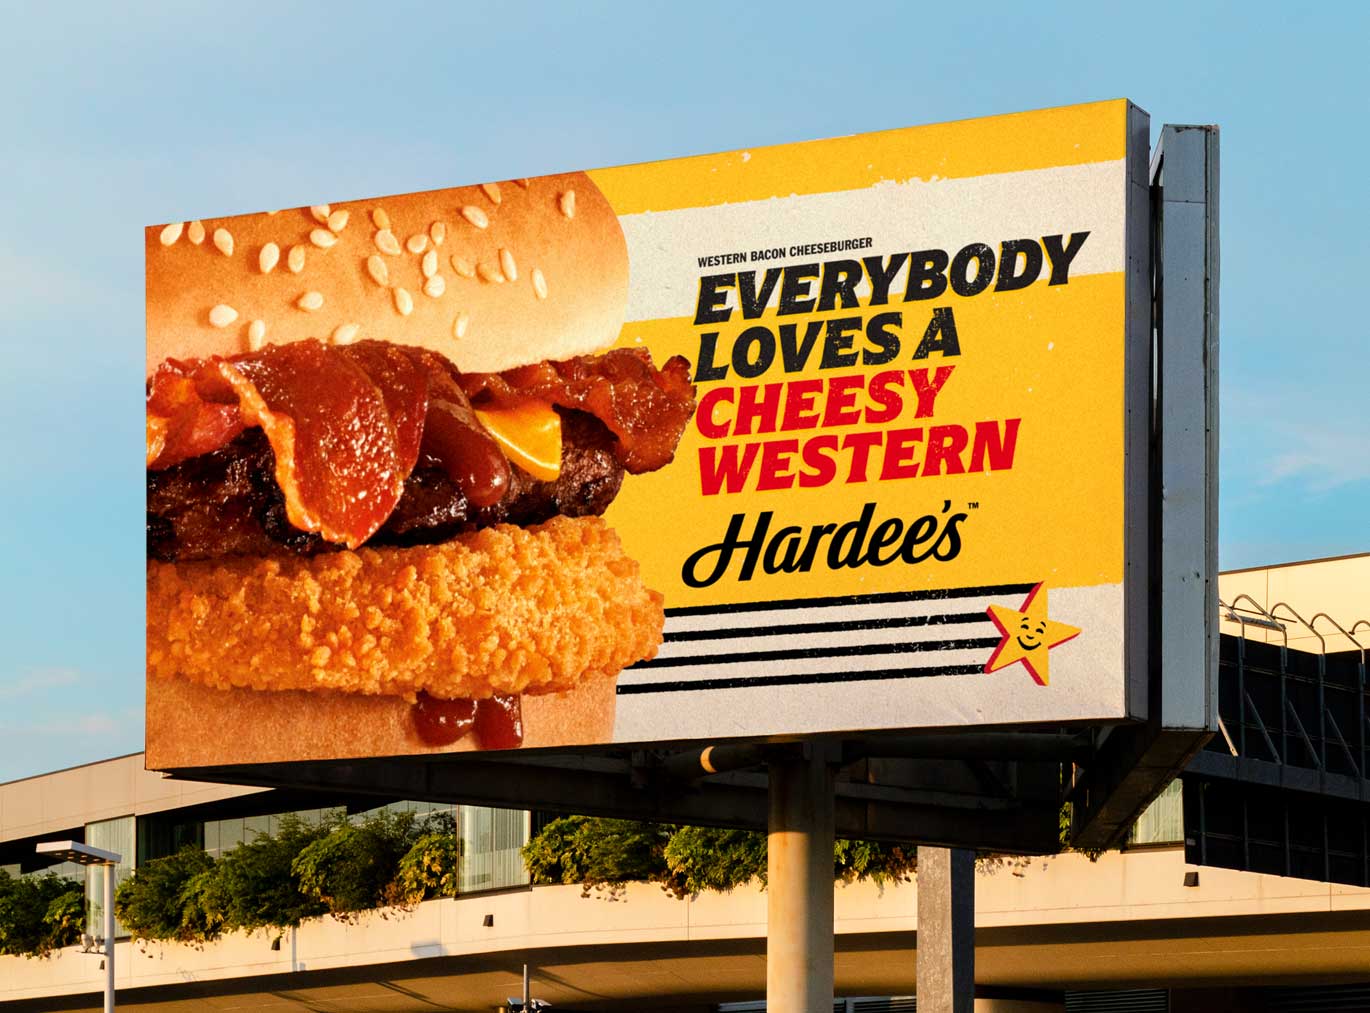 Billboard with a burger and the wordmark ‘Everybody loves a cheesy Western’ set in Arpona Italic and the Hardee's logo